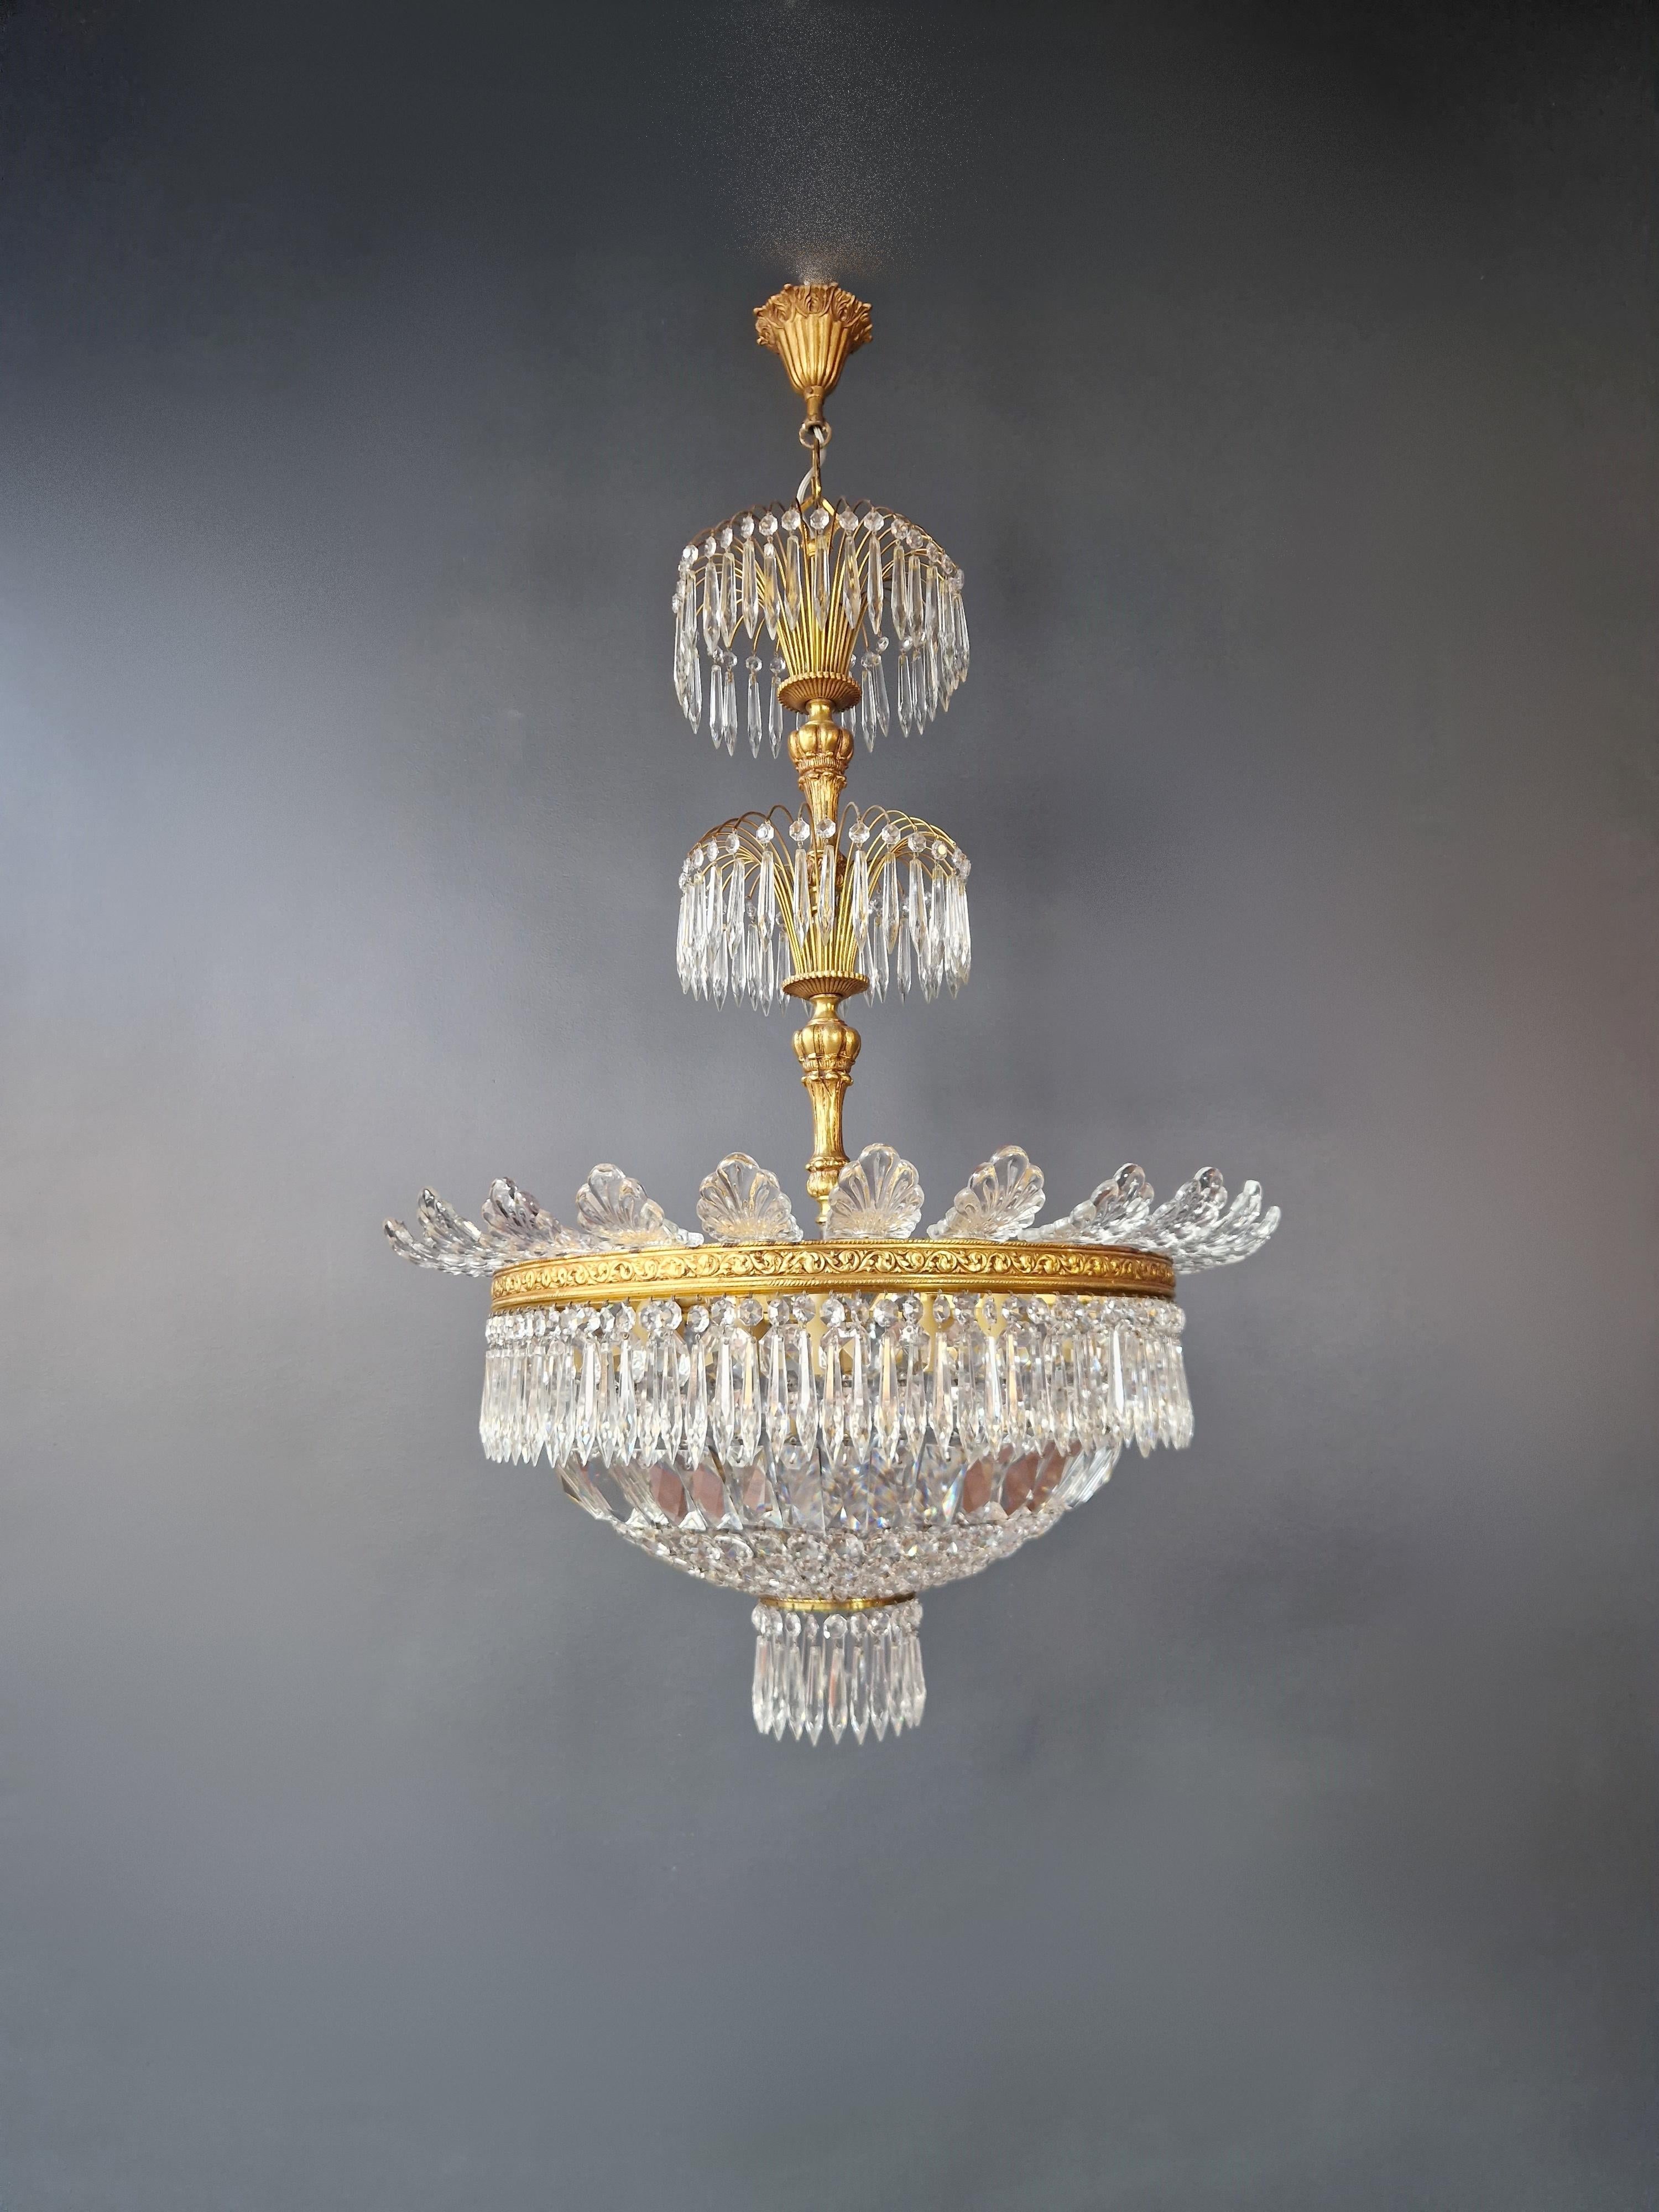 Pair Basket Chandelier Crystal Empire Brass Sac a Pearl Lustre Ceiling Antique In Good Condition For Sale In Berlin, DE